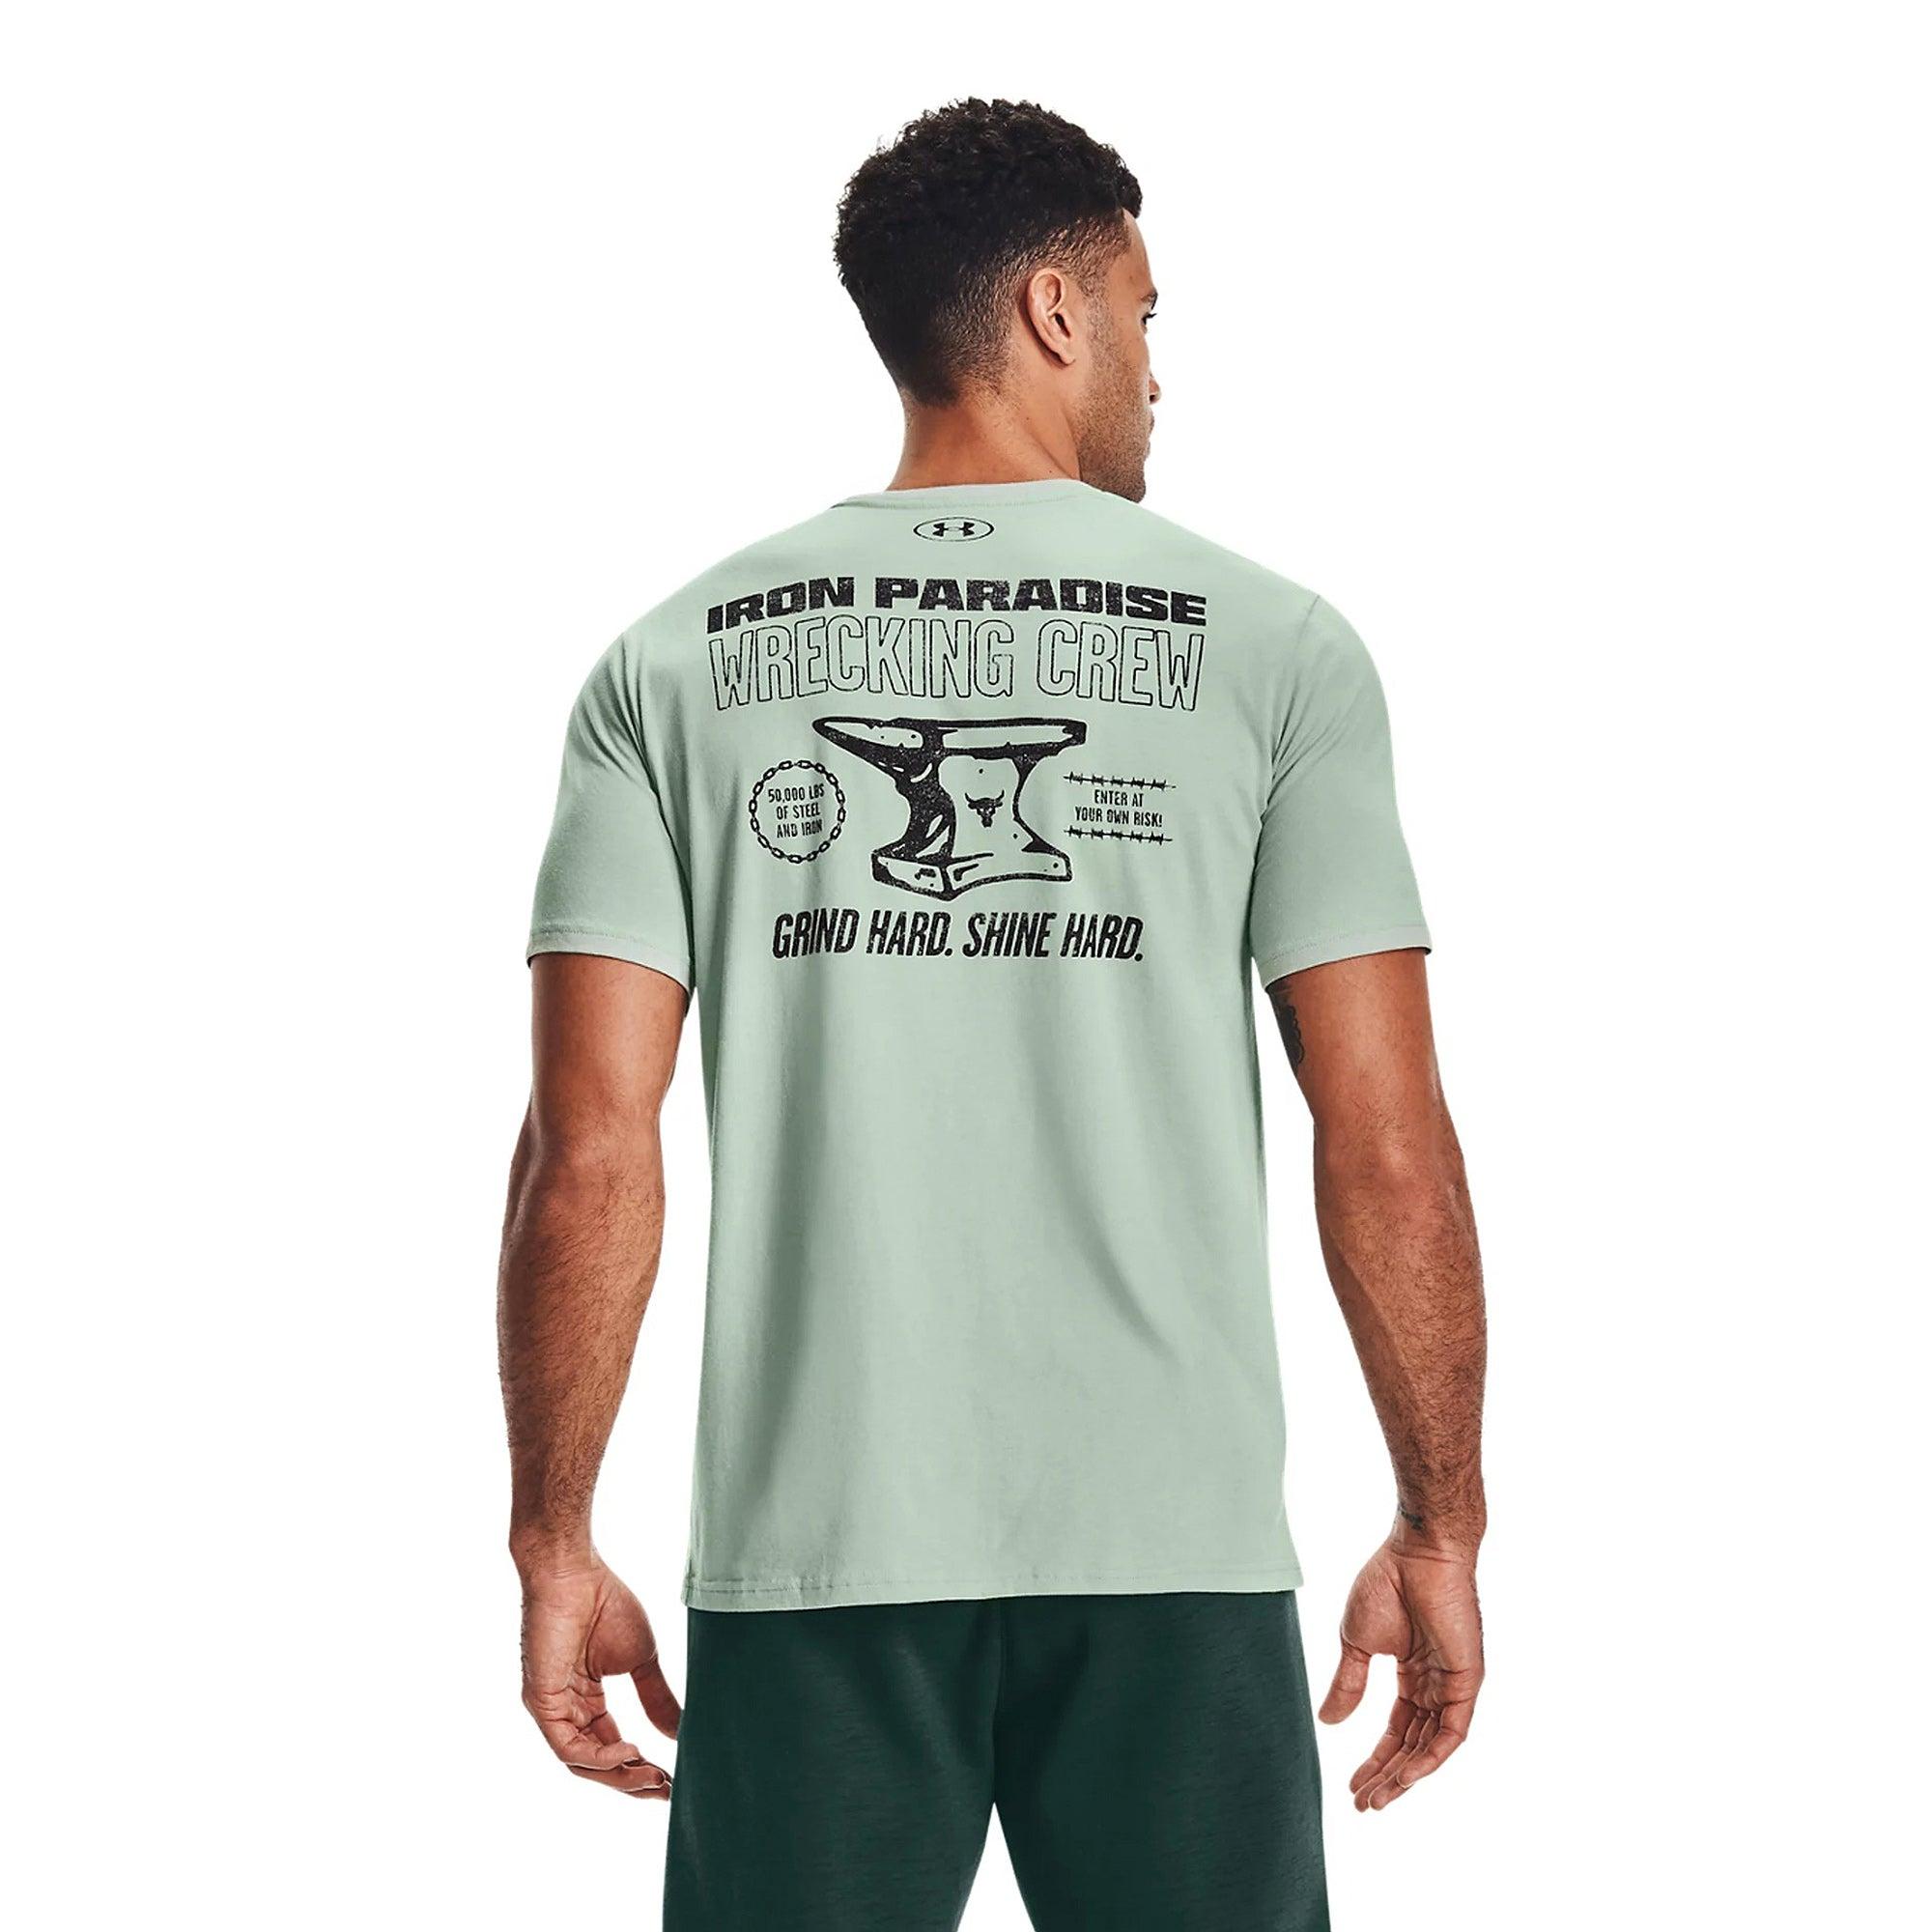 Áo thun tay ngắn thể thao nam Under Armour Project Rock Wrecking Crew - 1361725-340